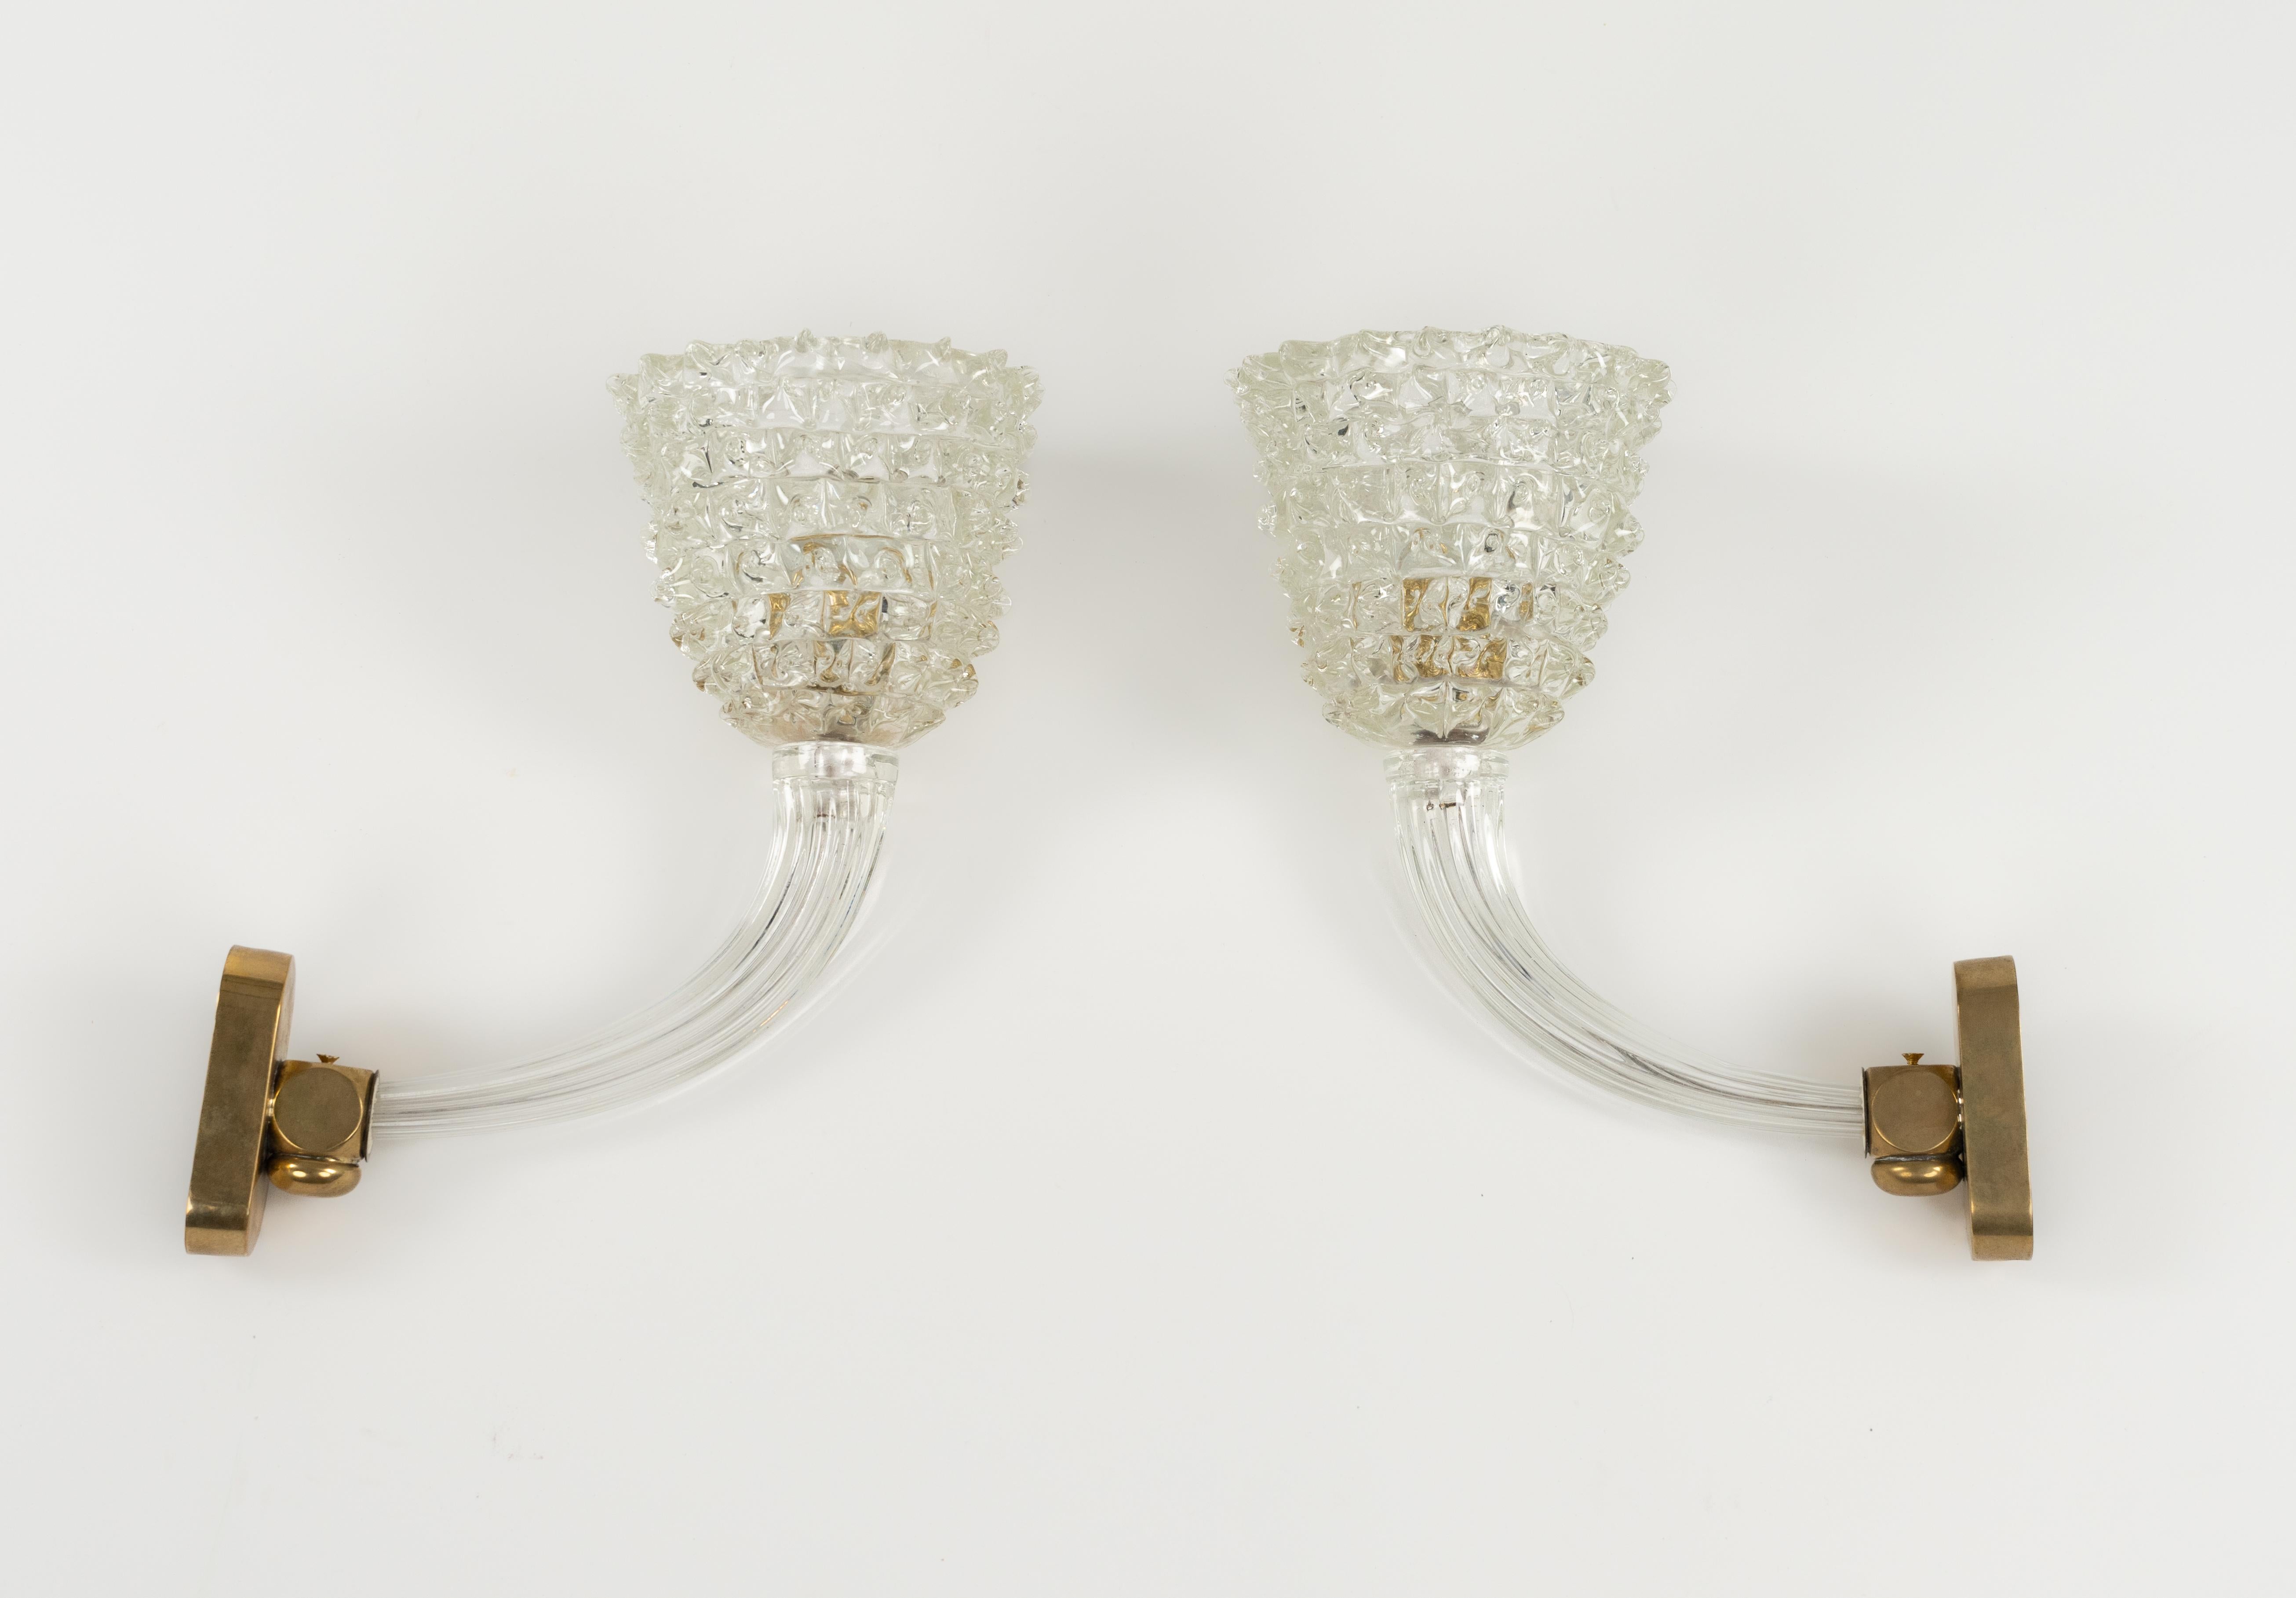 Mid-Century Modern Pair of Sconces Rostrato Murano Glass & Brass Barovier & Toso Style, Italy 1950s For Sale